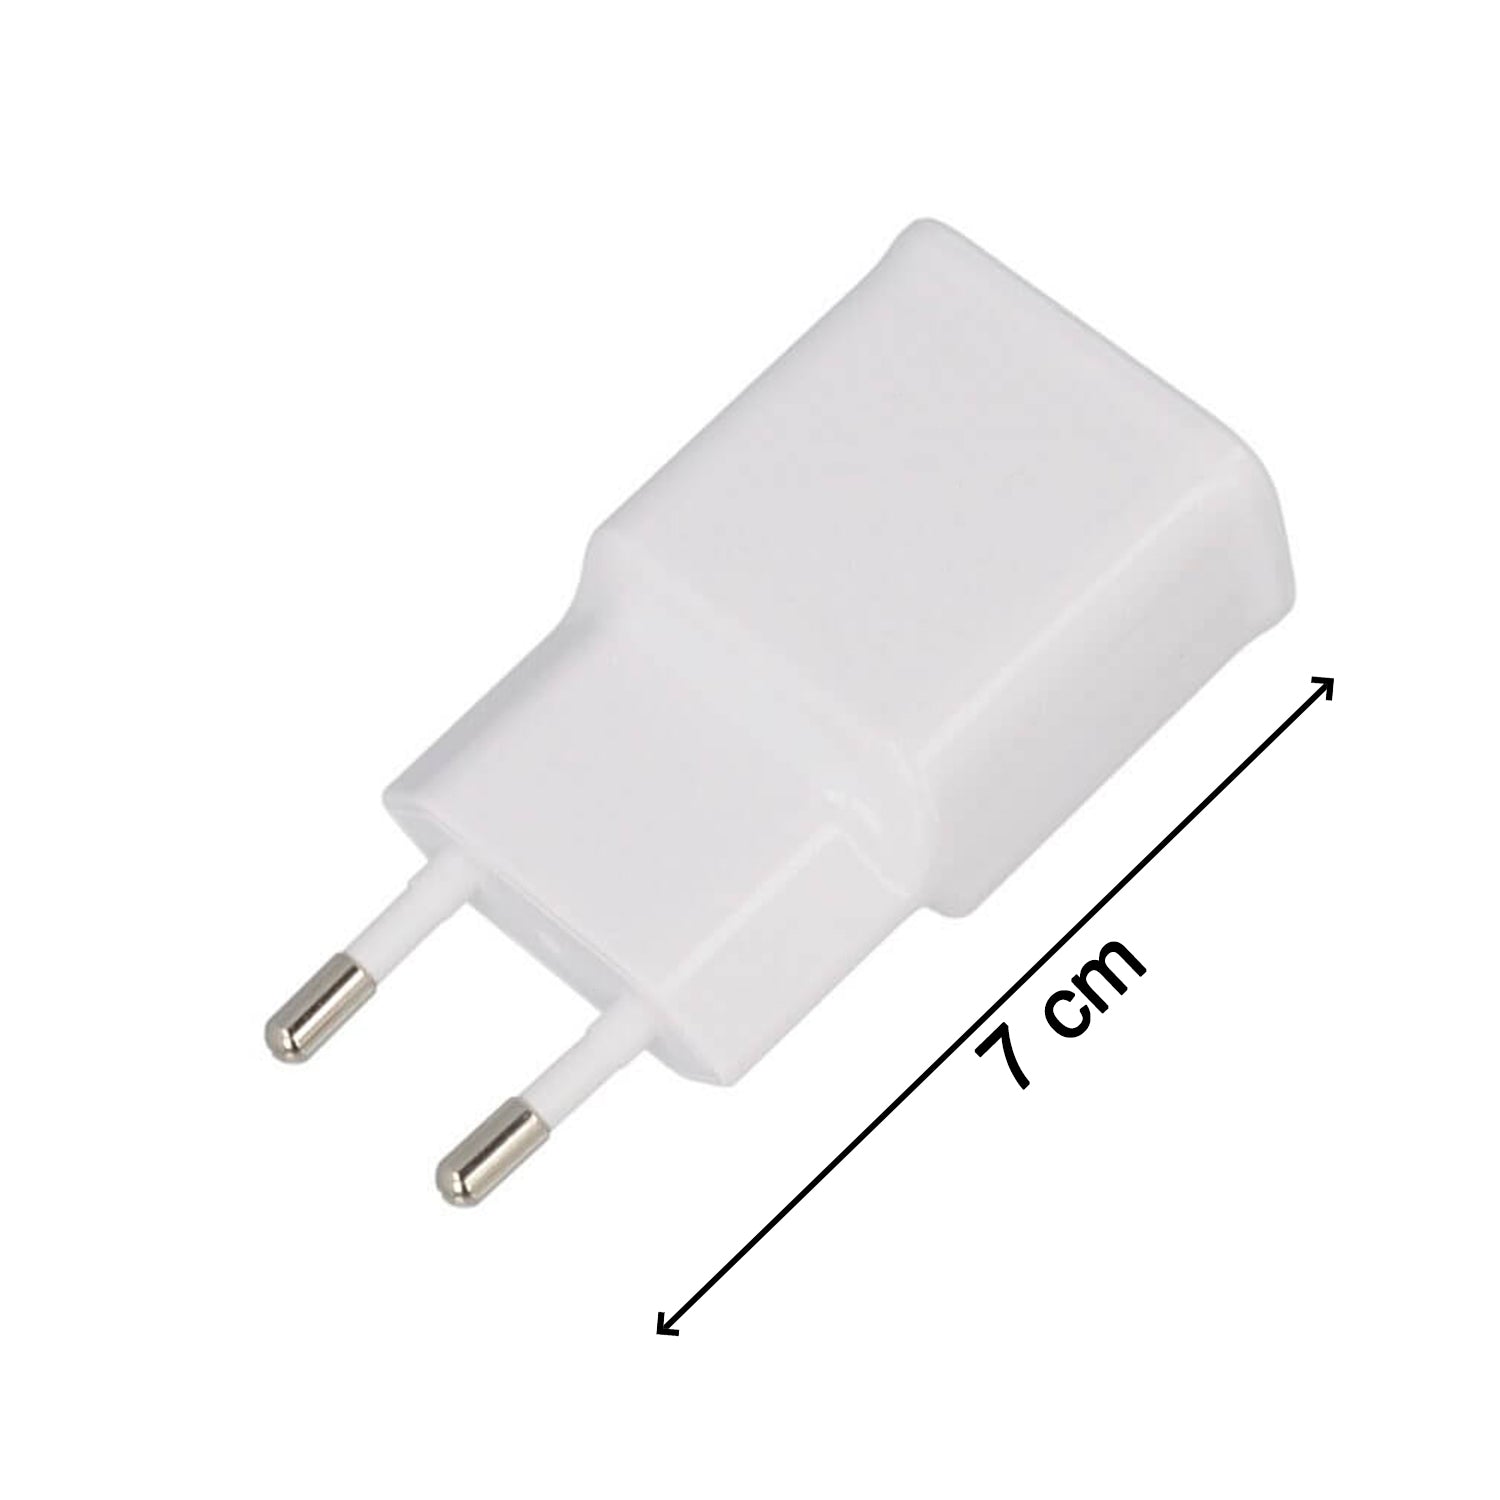 6102 Fast Charging Power Adaptor Without Cable for Devices (Adaptor Only)